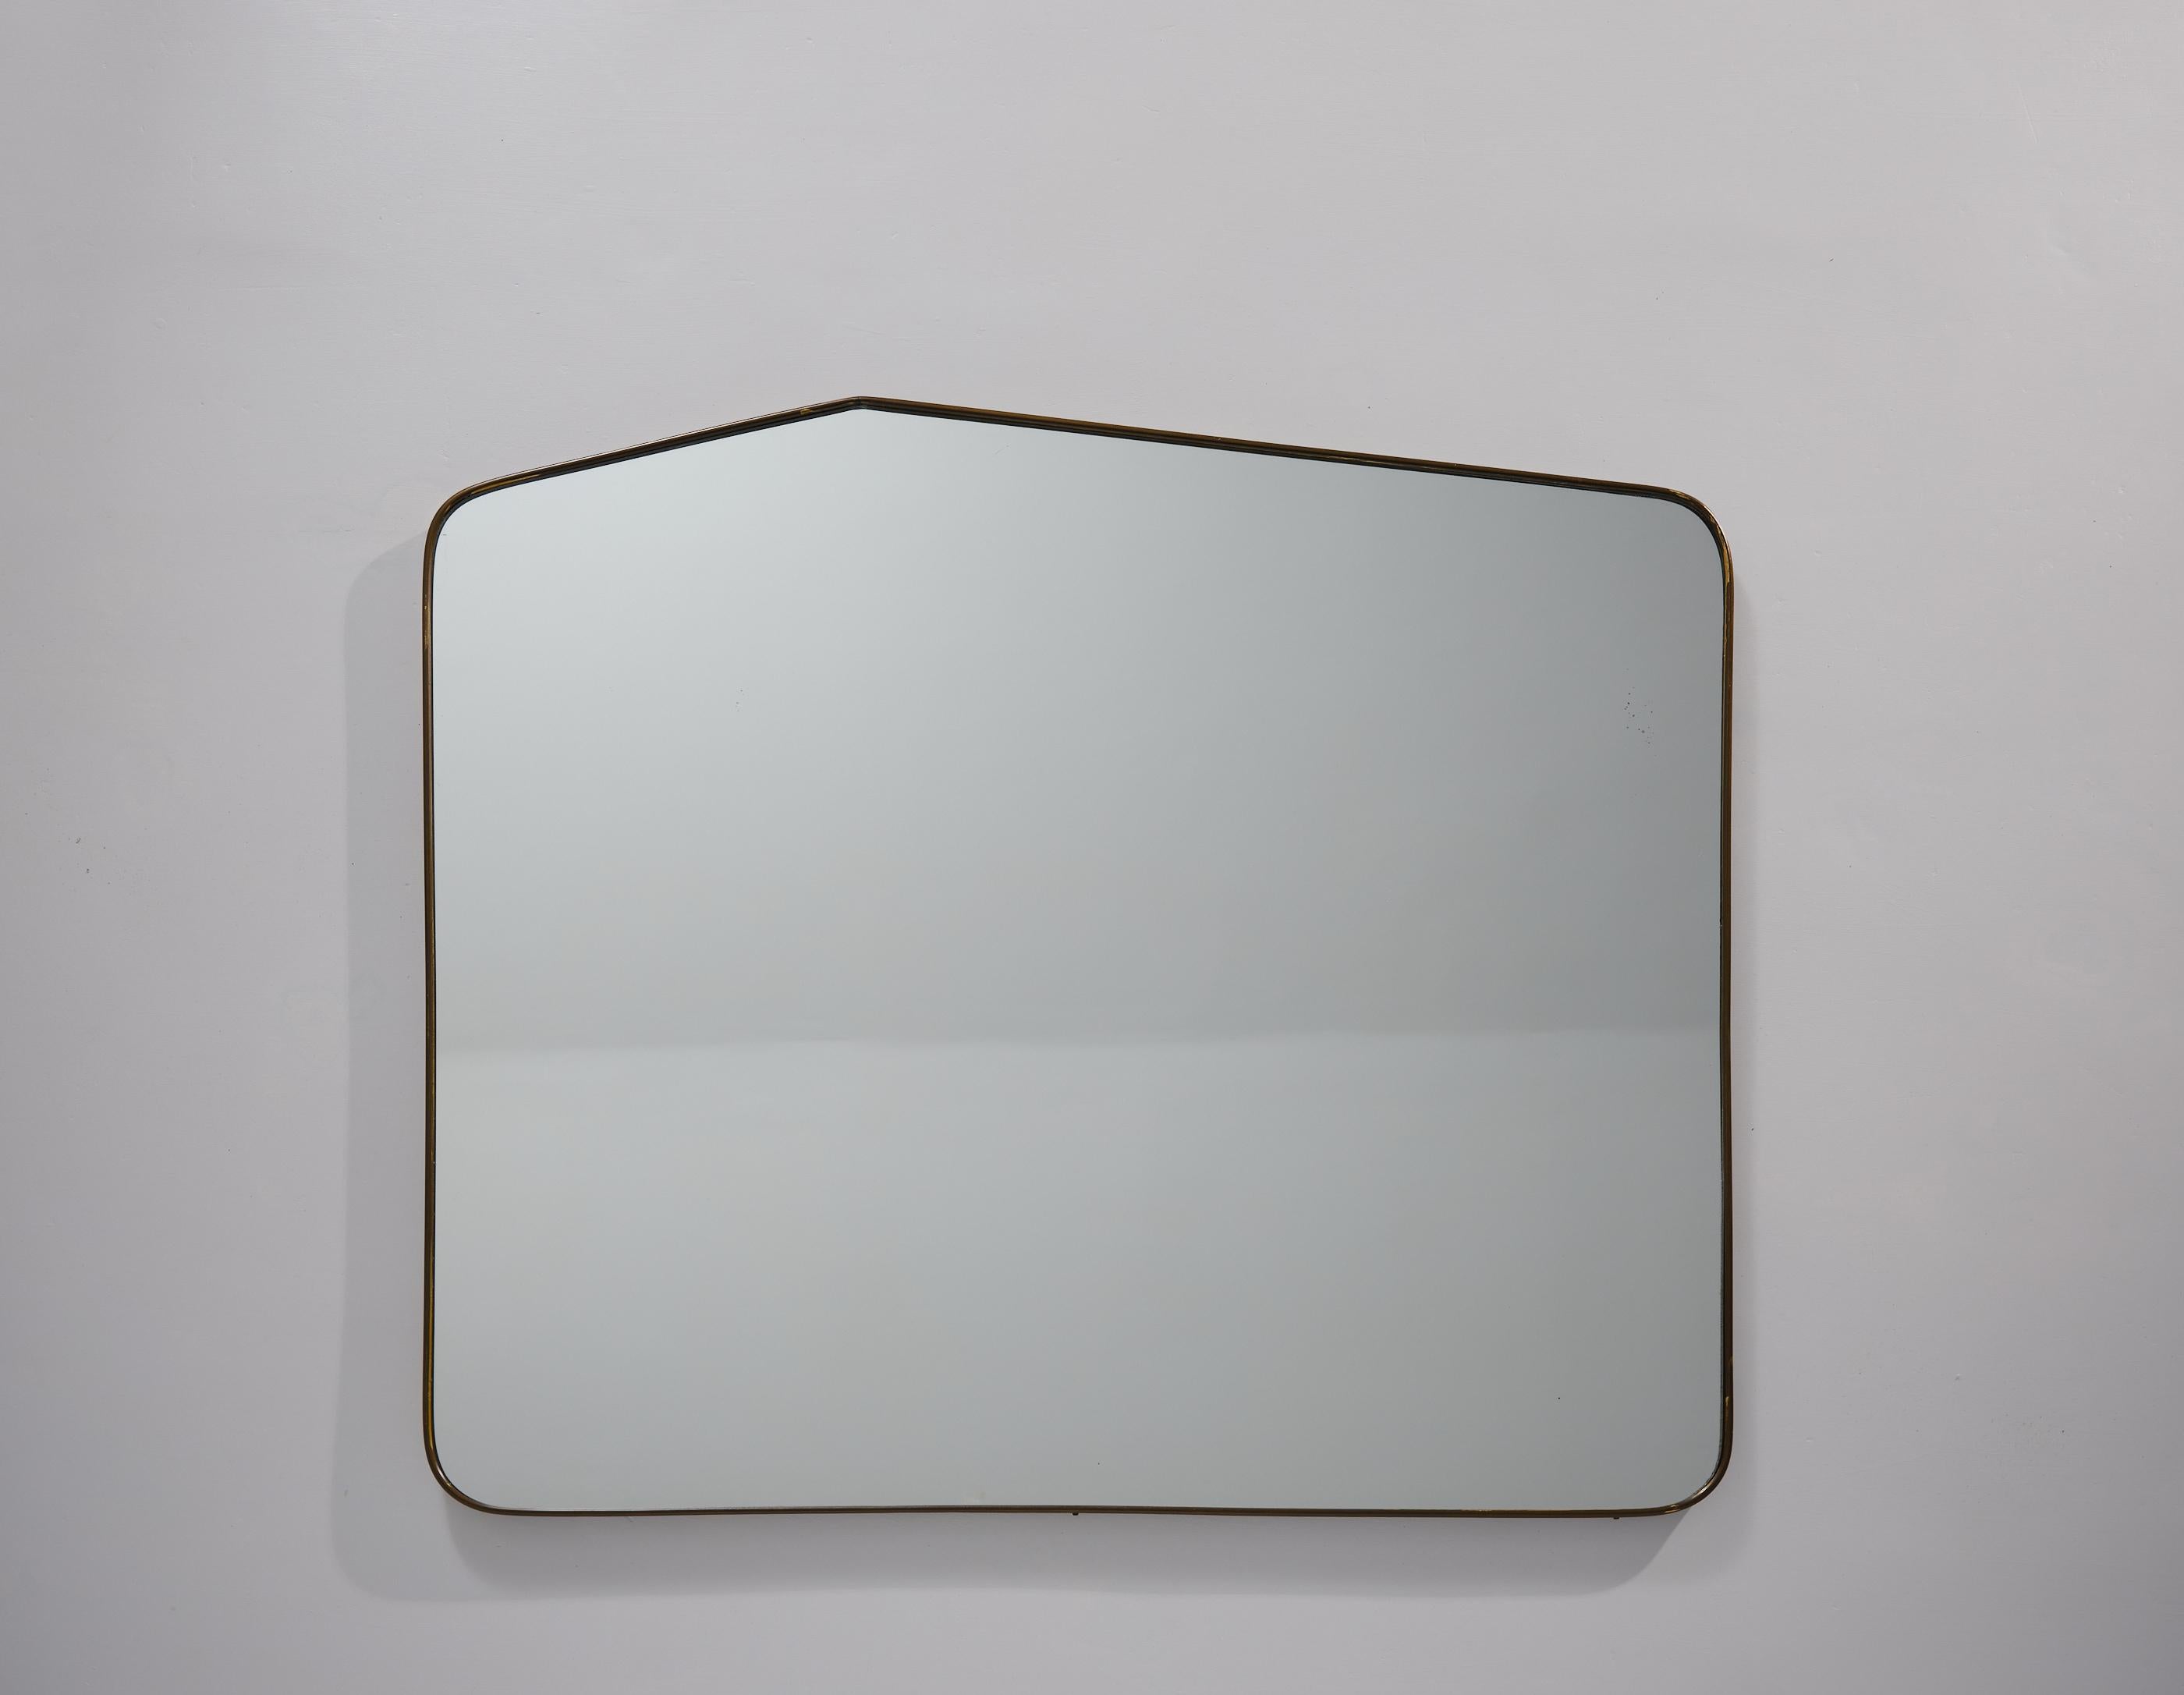 Italian wall mirror of modern design from the 50's

Made of mirrored glass and brass.